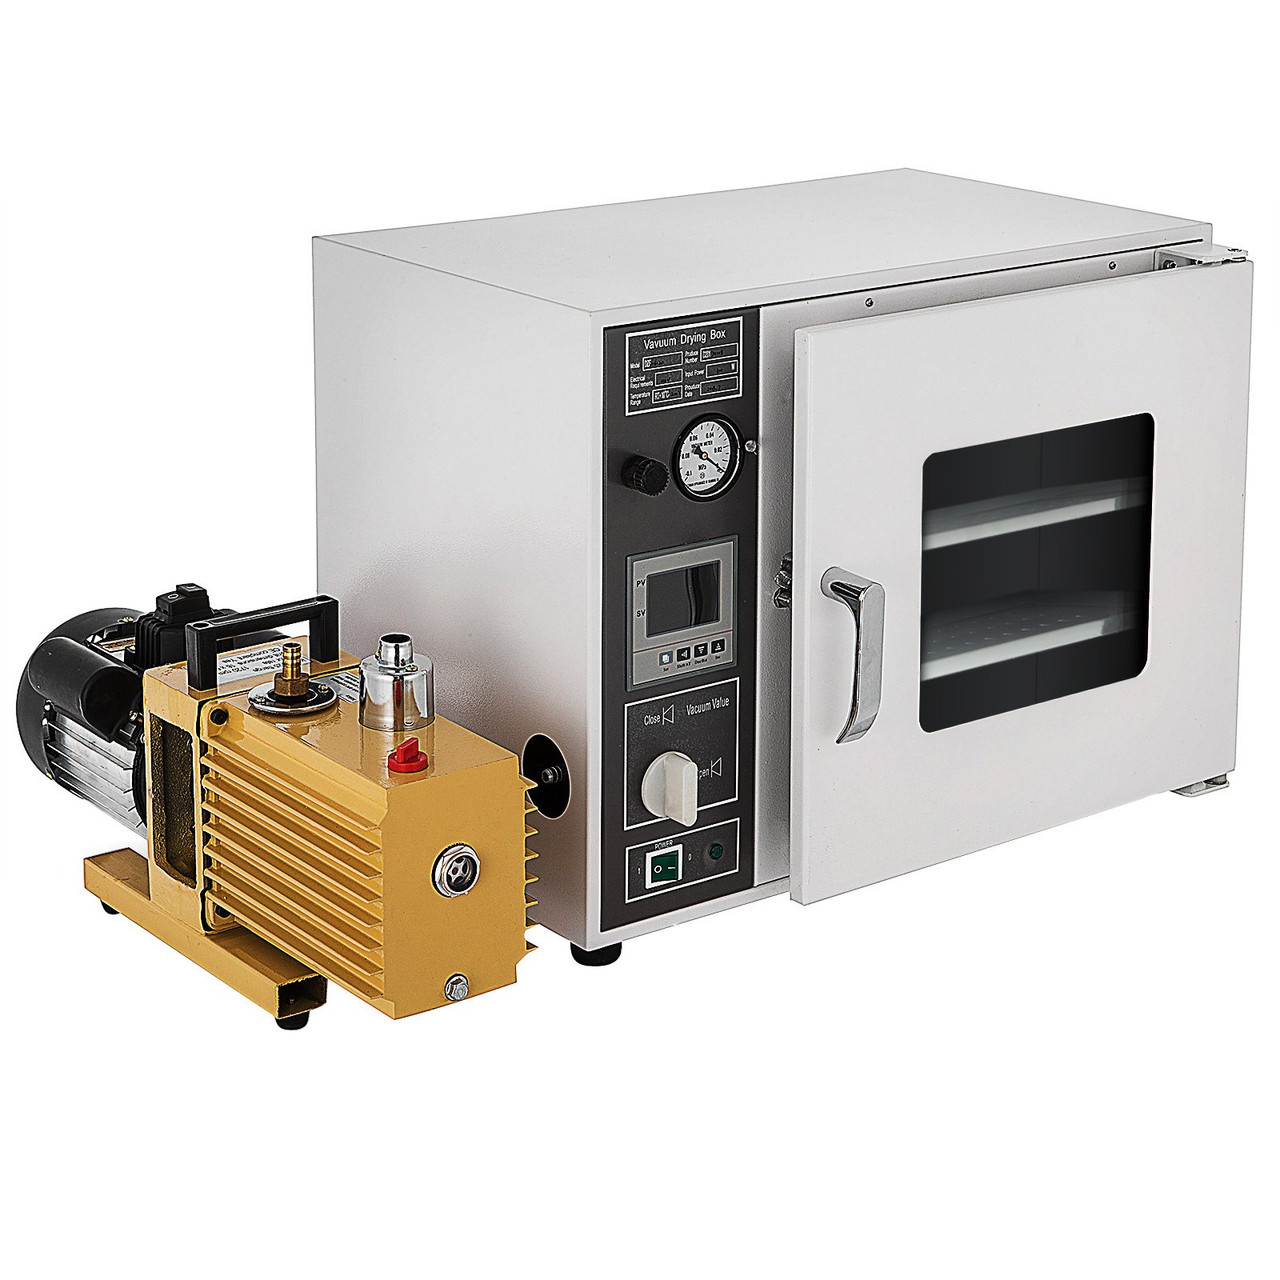 VEVOR 1.9 cu ft Drying Oven 9 cfm Vacuum Pump 133Pa Max. 1400W Heating Power 5 Trays